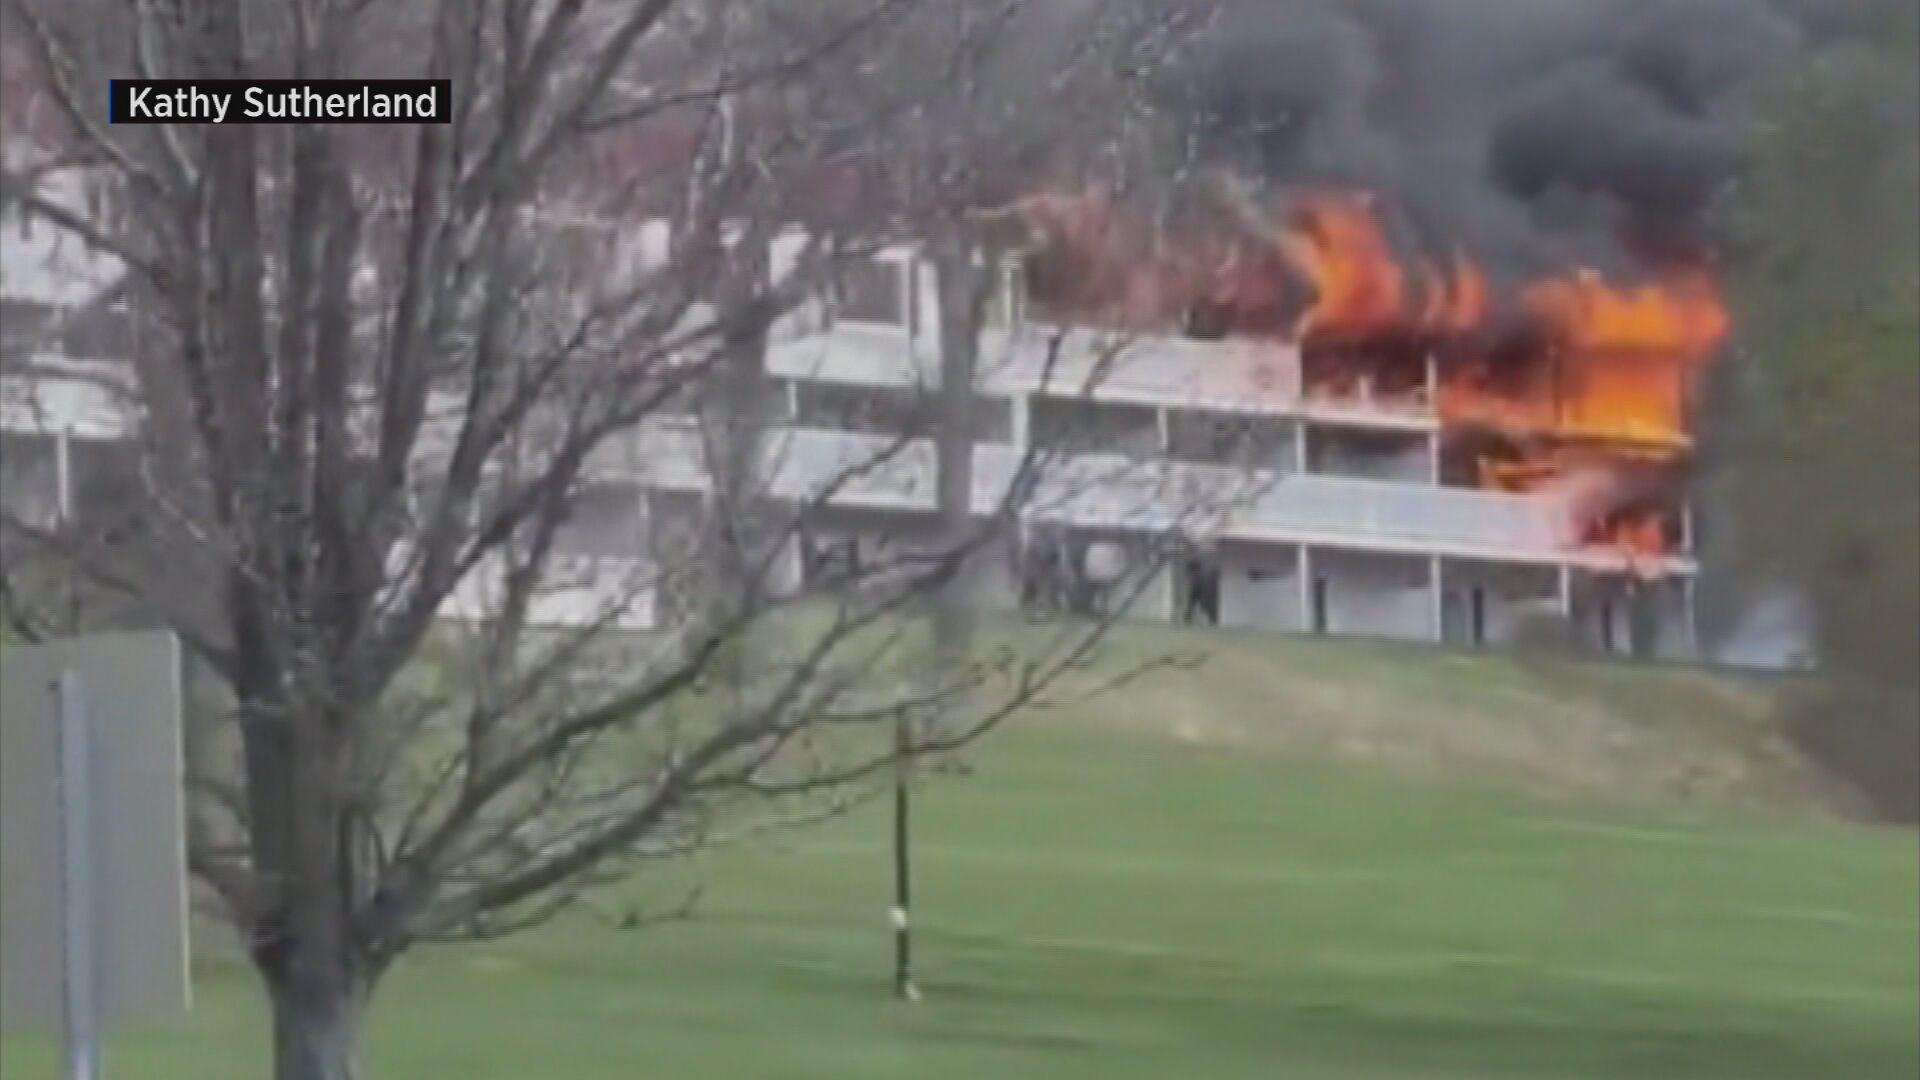 Red Jacket Resort In New Hampshire Didn’t Have Sprinklers In Wing Destroyed By Fire – CBS Boston